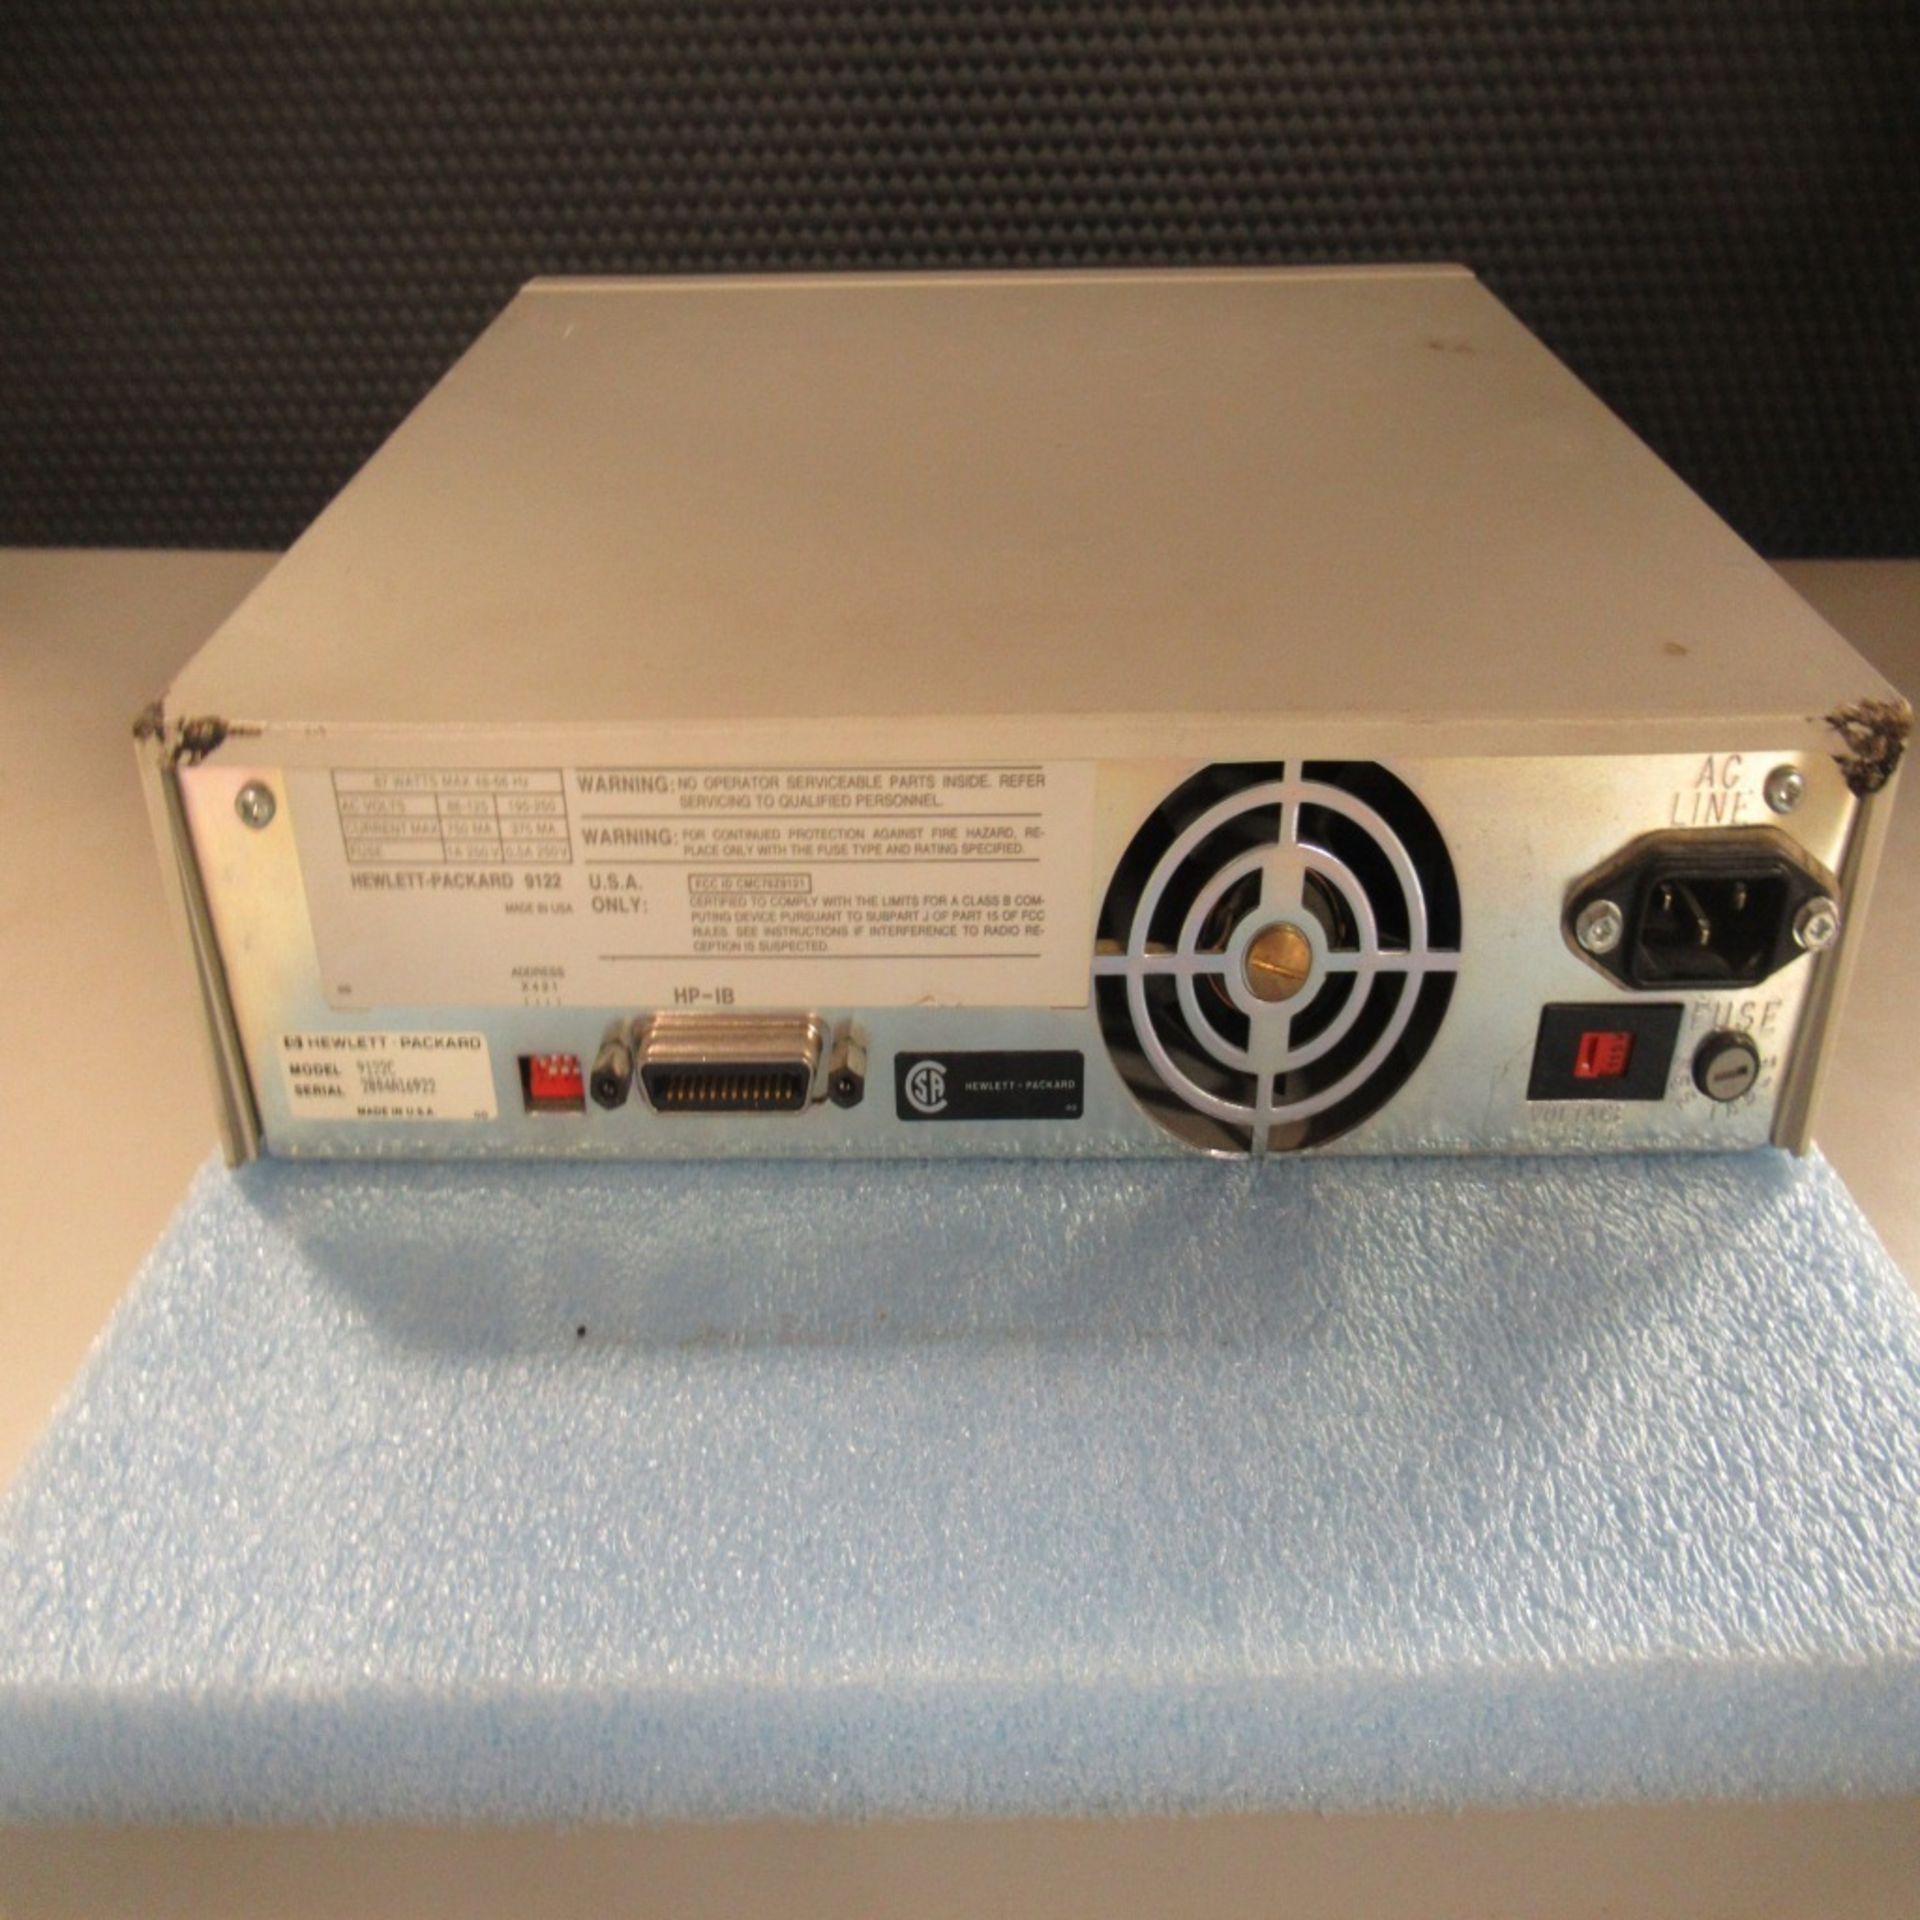 PHOTON SNAP SHOT MODEL 6000 *POWERS ON* NO SCREEN DISPLAY; FARNELL AP20-80 REGULATED POWER SUPPLY * - Image 202 of 222